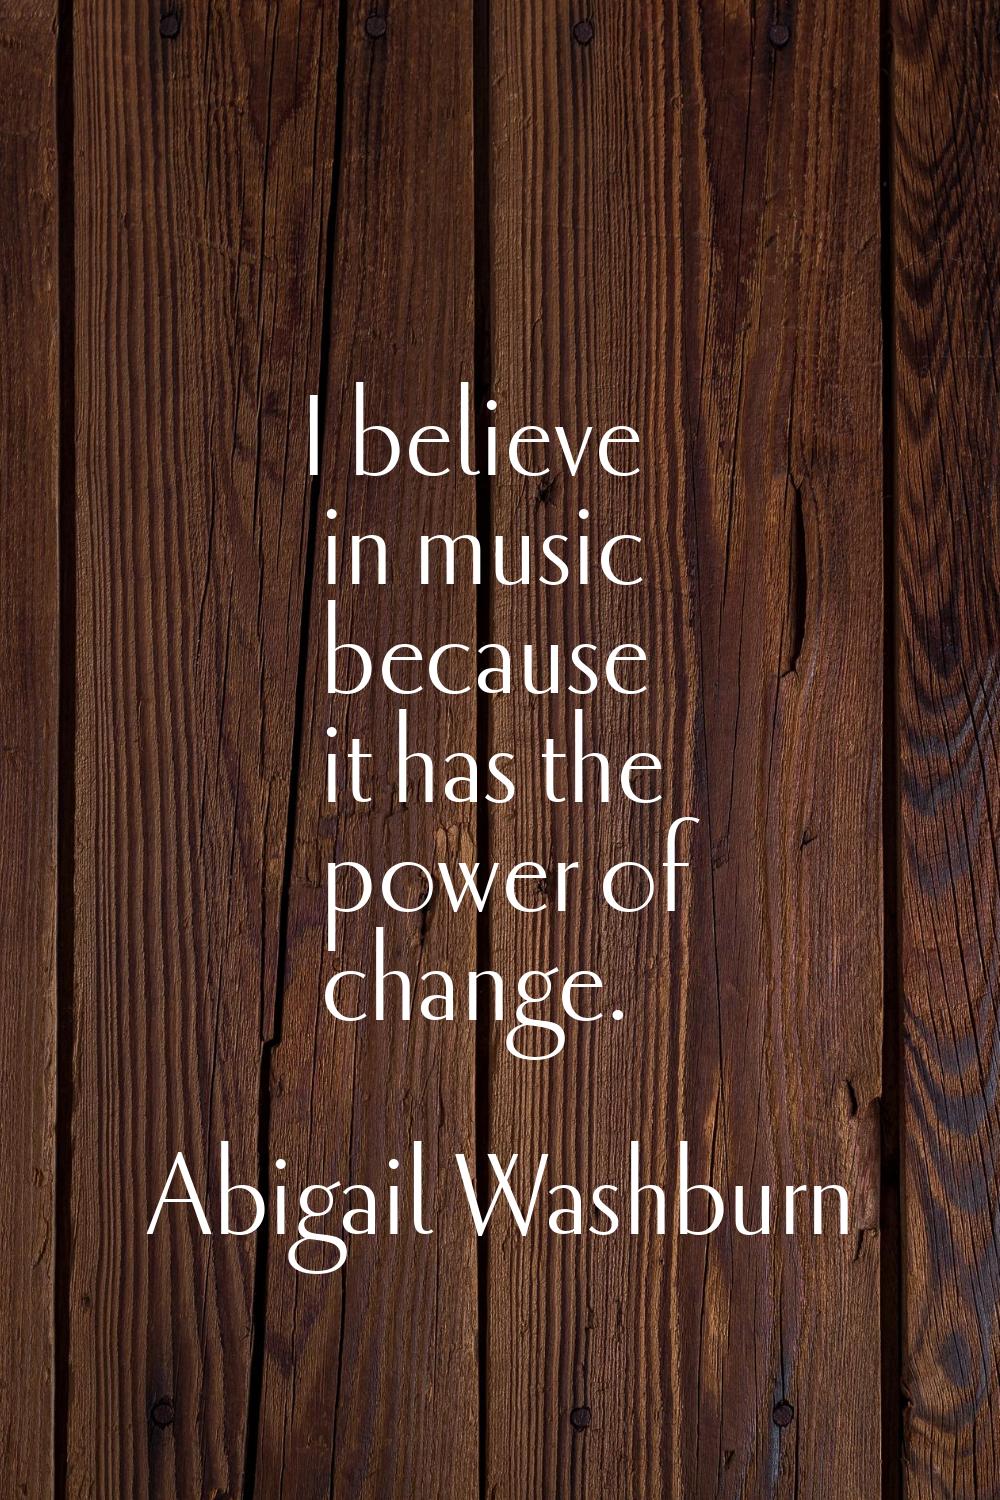 I believe in music because it has the power of change.